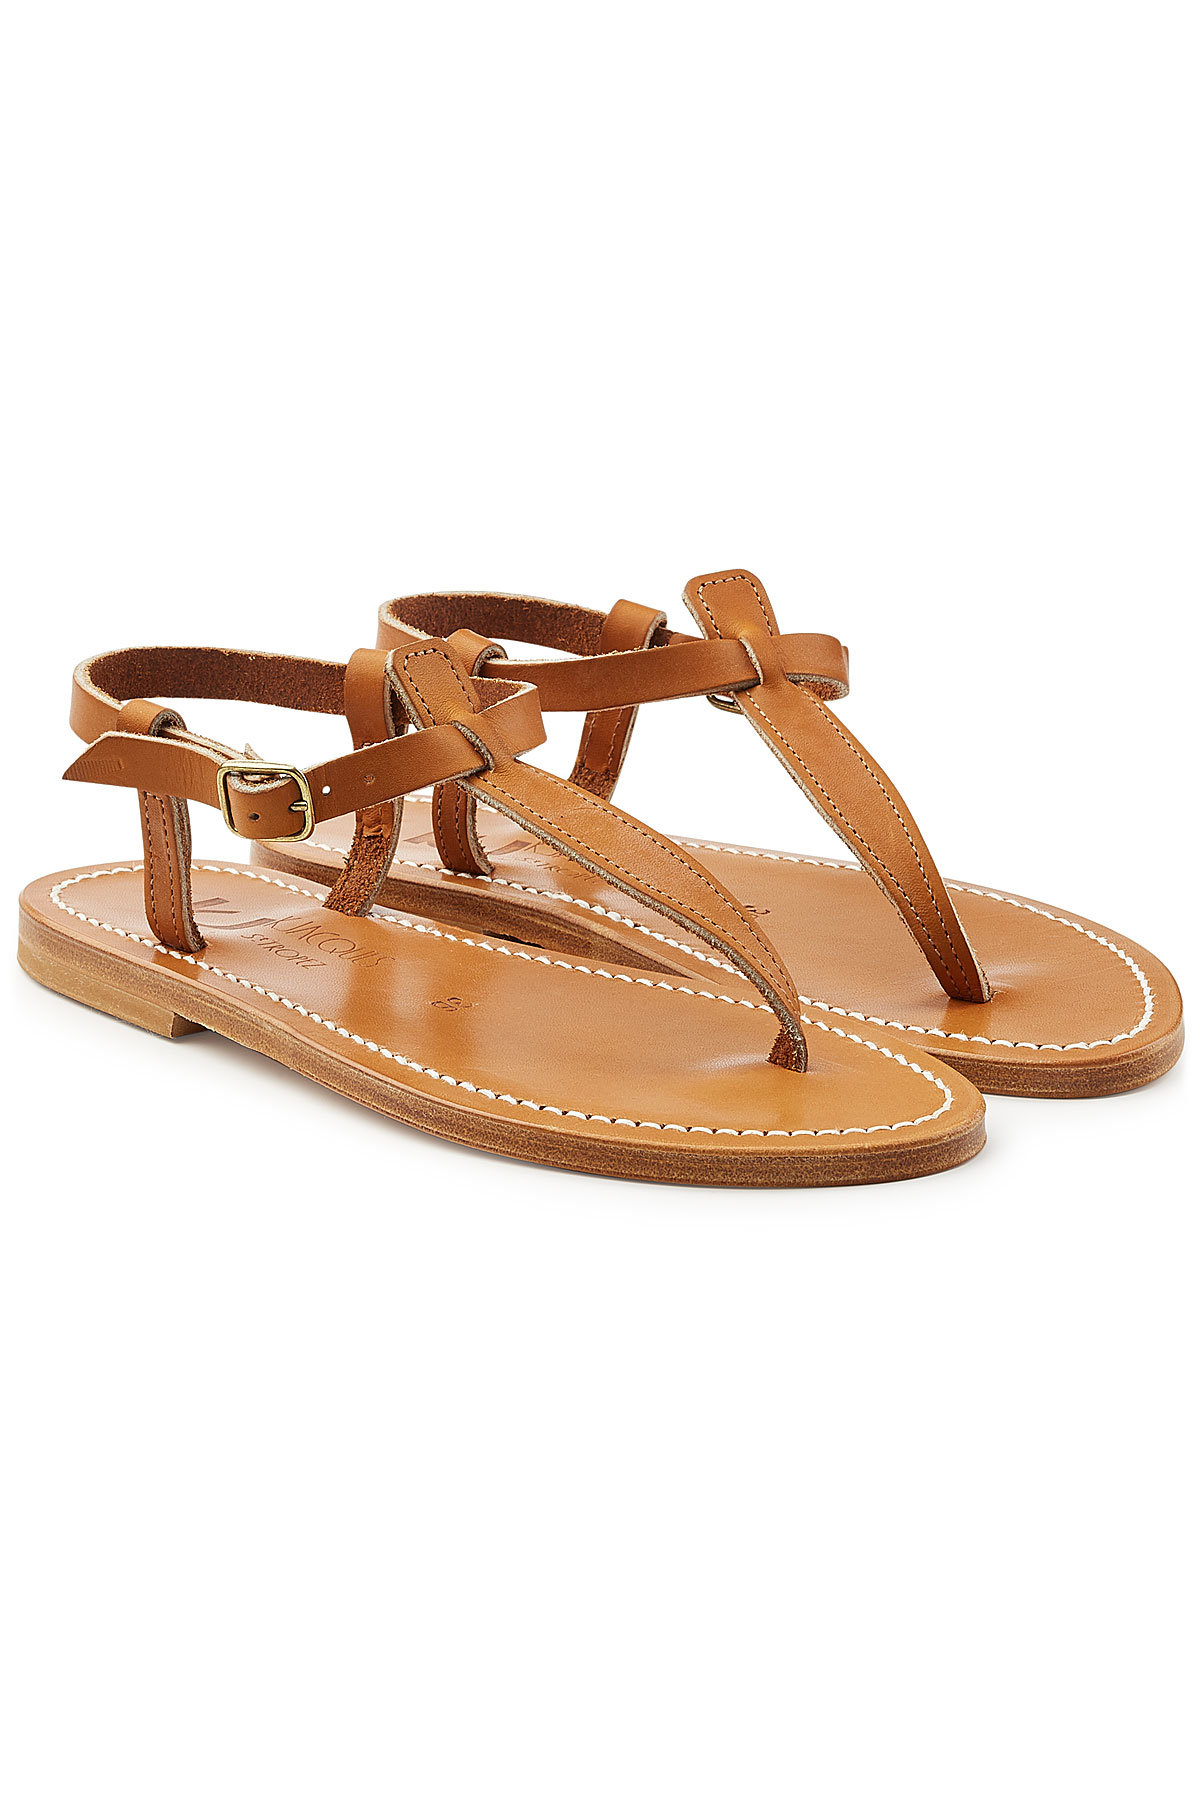 Picon Leather Sandals by K.Jacques